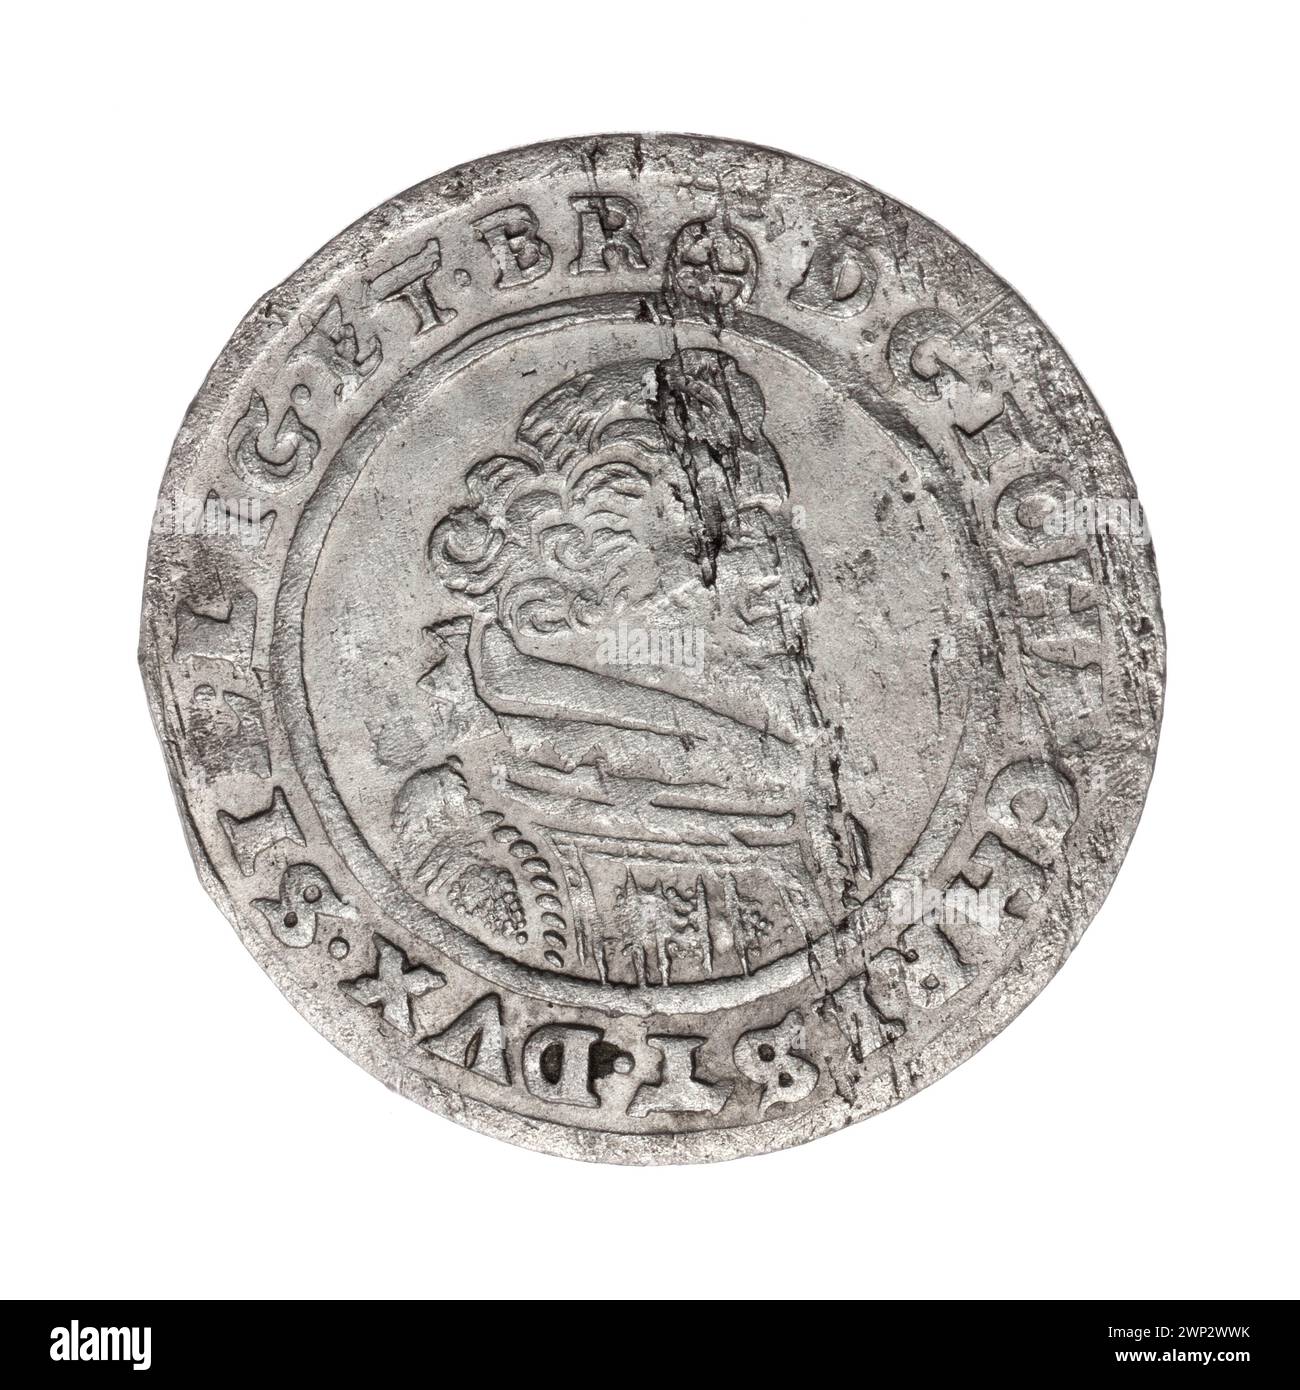 24 Krajcary; Jan Christian (KSI  Legnica-Brzeski; 1591-1639), Hase, Burkhardt (fl. 1603-1623); 1622 (1622-00-00-1622-00-00);Jan Christian (Prince of Brest - 1591-1639), Jan Christian (Prince of Brest - 1591-1639) - iconography, Piastów (family), Duchy of Brest (coat of arms), Duchy of Legnica -Brzeskie (coat of arms), letters, letters B - h, Busters of the ruler, portraits, portraits in parade armor, four -track coat of arms, shields, coat of arms, coat of arms at Mitra Książęca Stock Photo